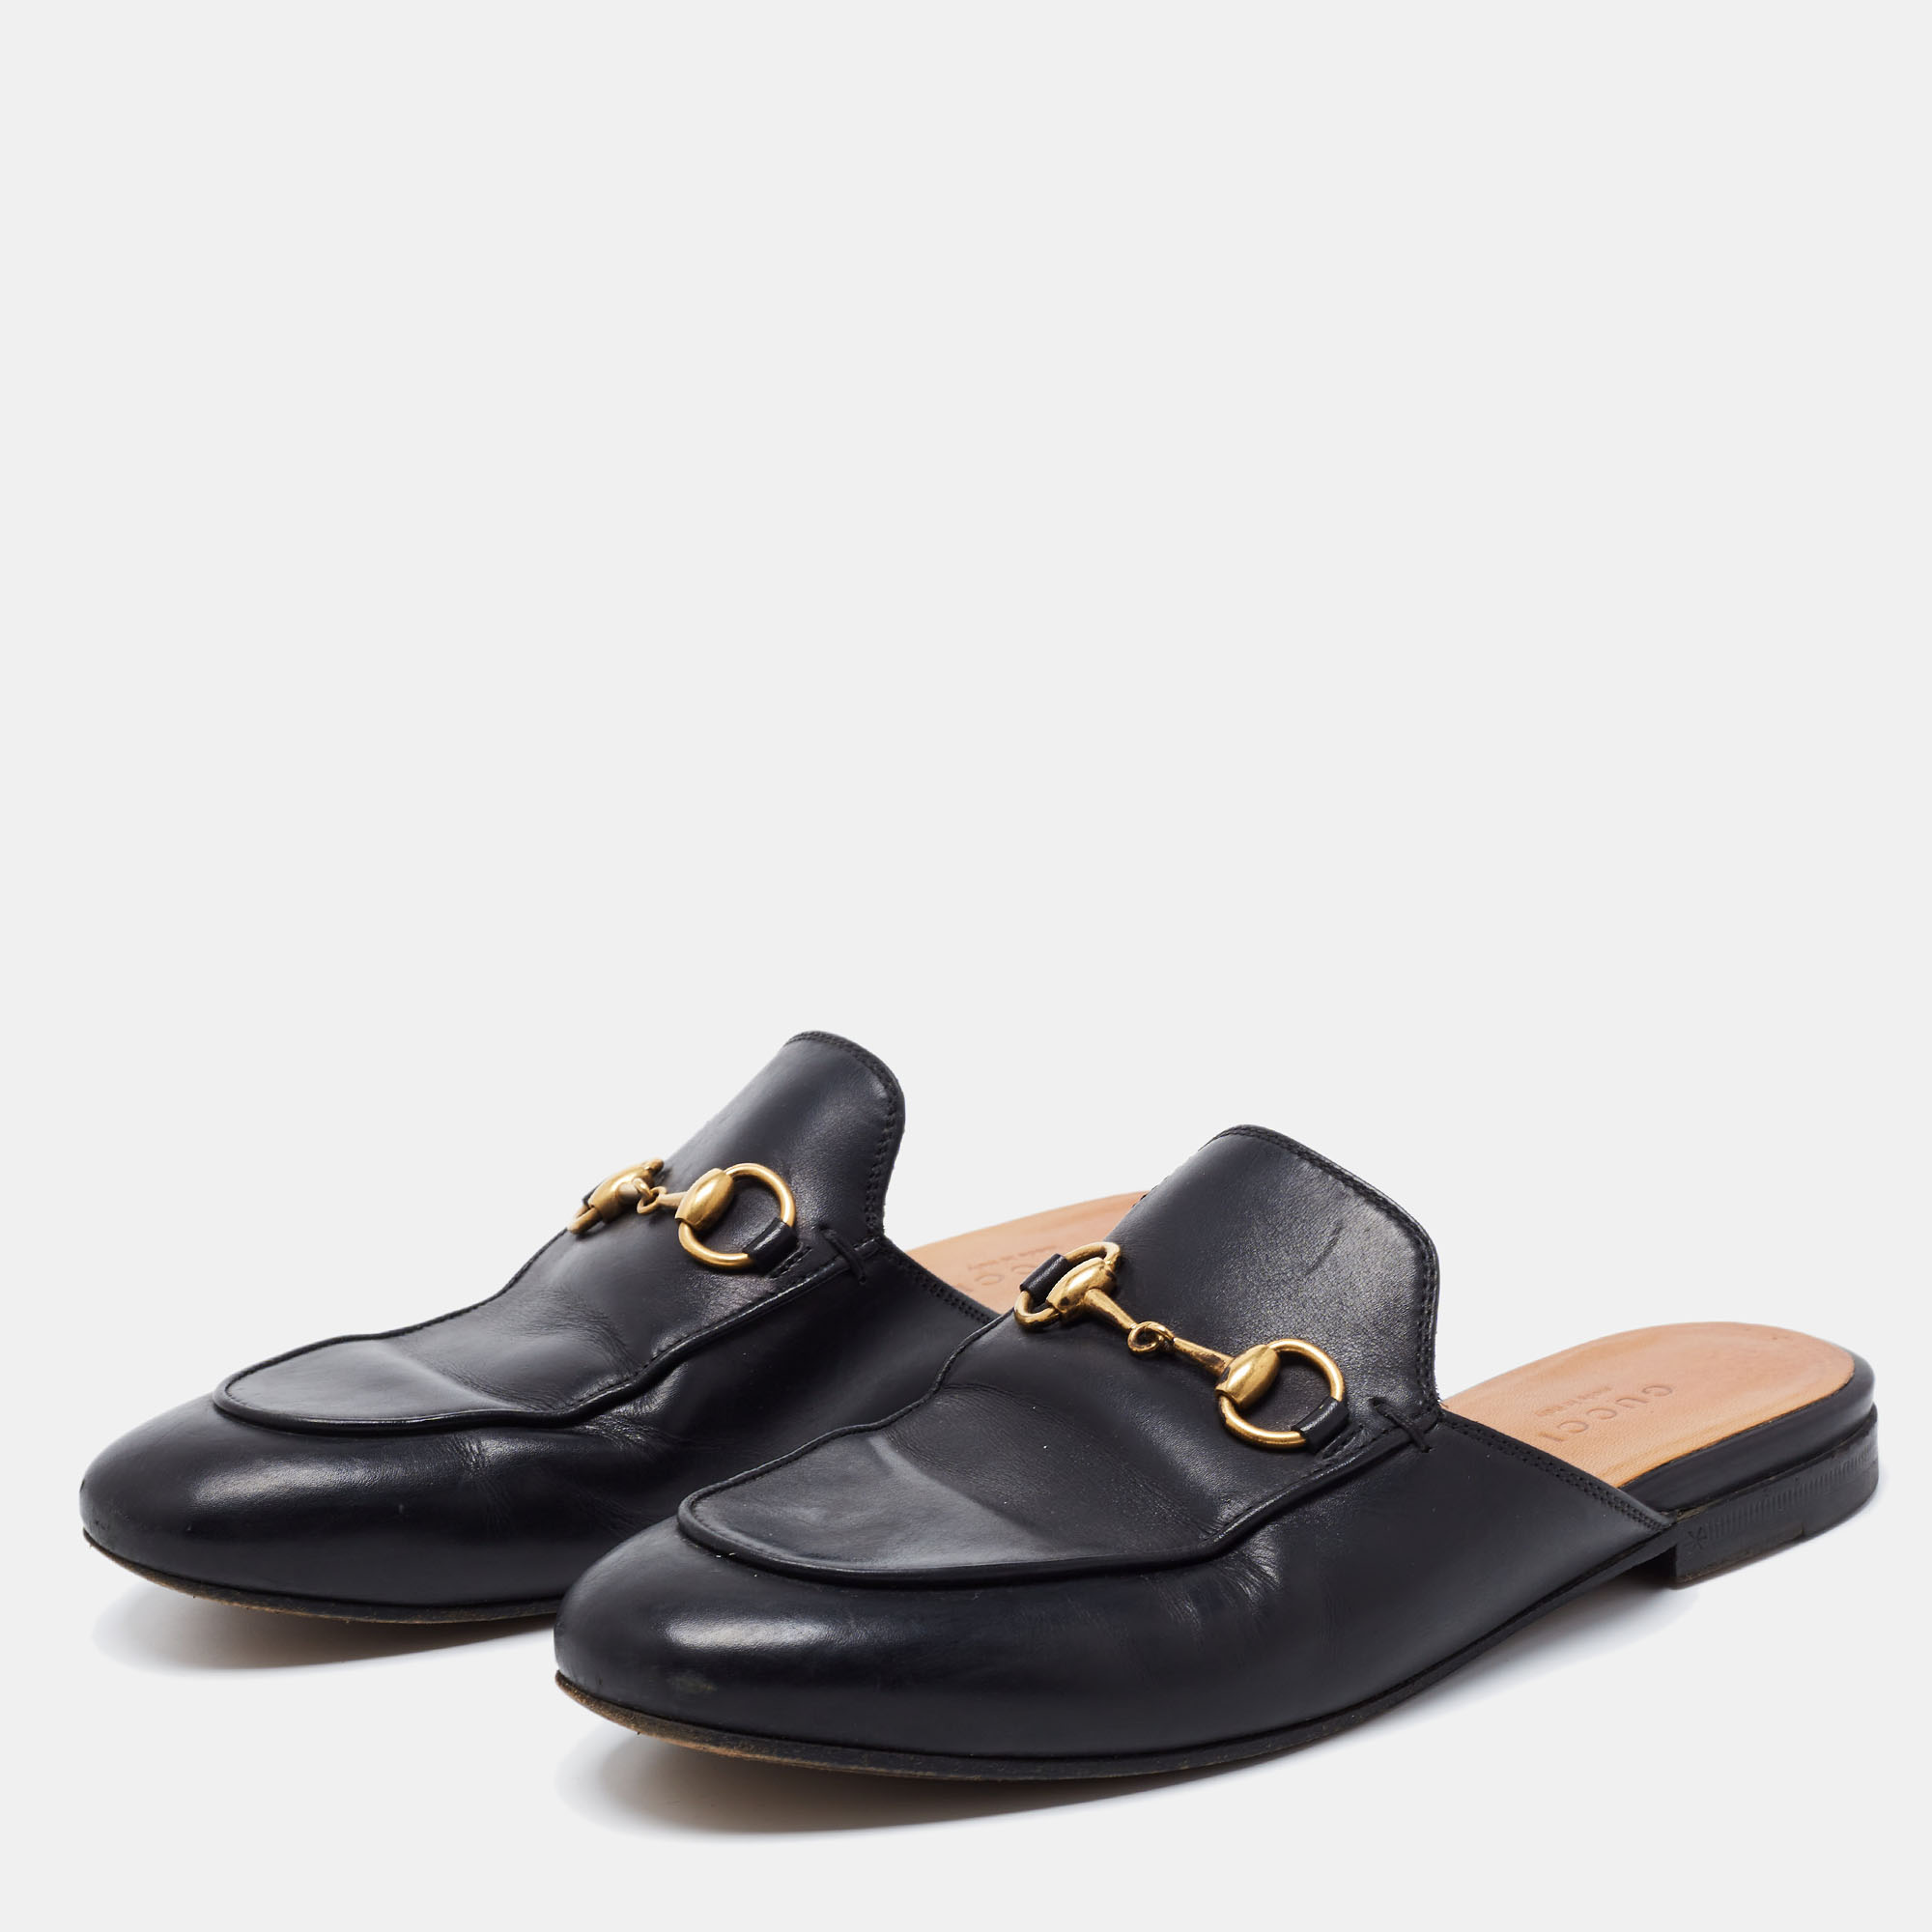 

Gucci Black Leather Princetown Flat Mules Size